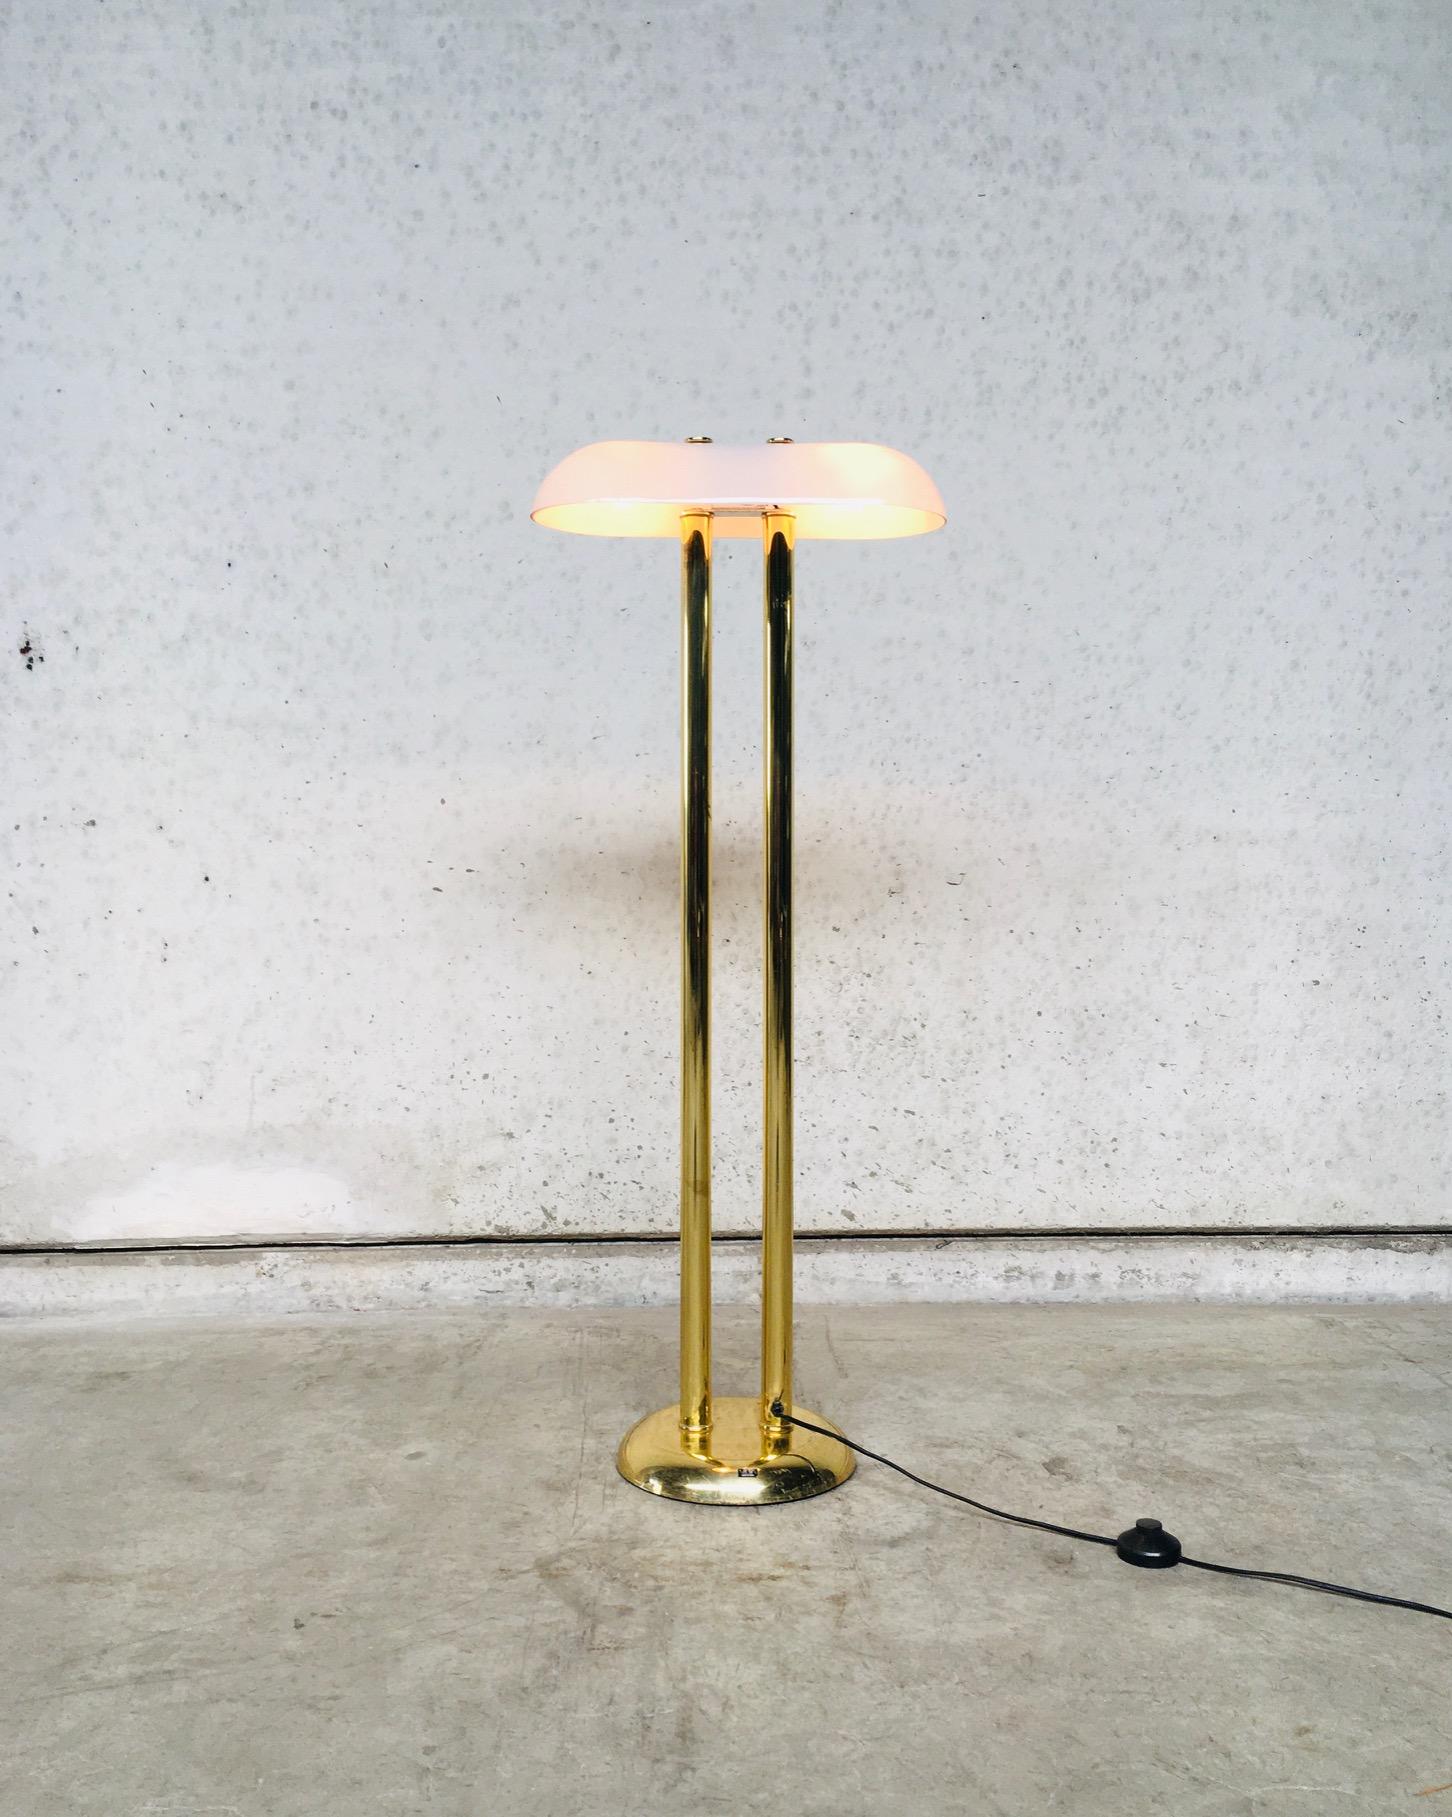 Late 20th Century Mid-Century Modern Design Floor Lamp by Vibia Spain, 1970's For Sale